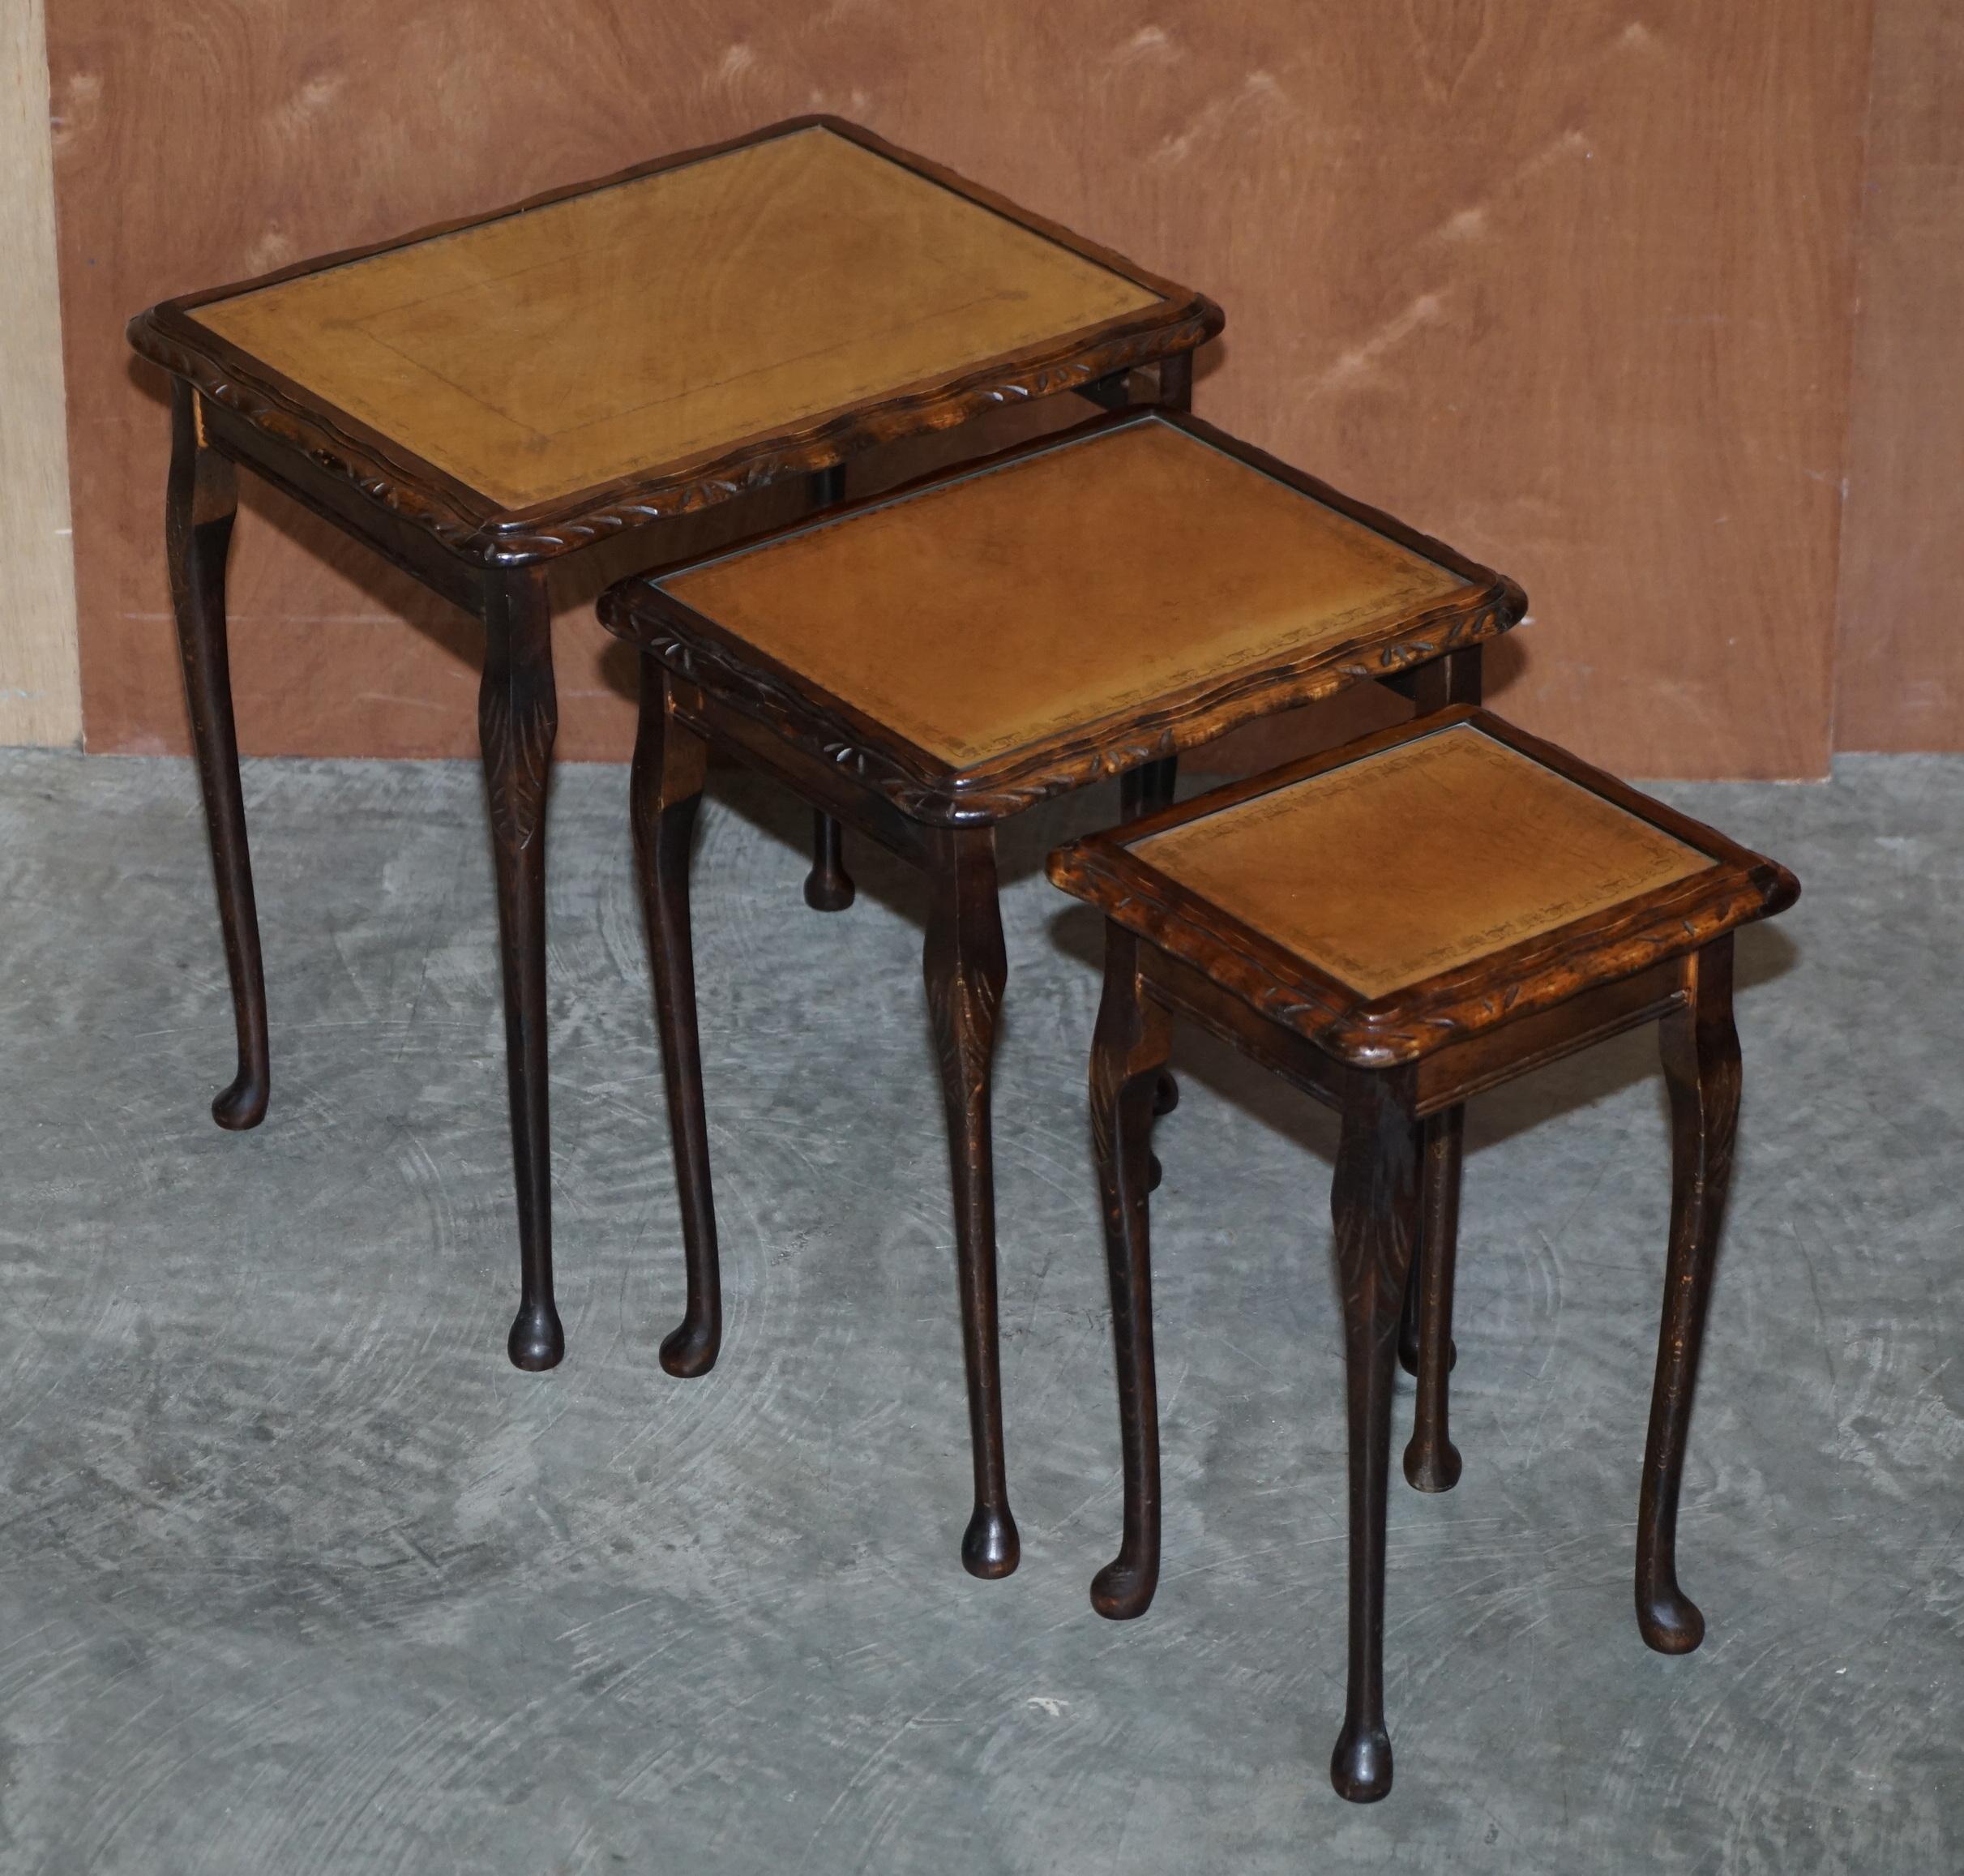 We are delighted to offer for sale this lovely nest of three tables which have gold leaf embossed tan brown leather tops that are protected by glass 

A very good looking and well made nest, each table has a tan leather top which looks very